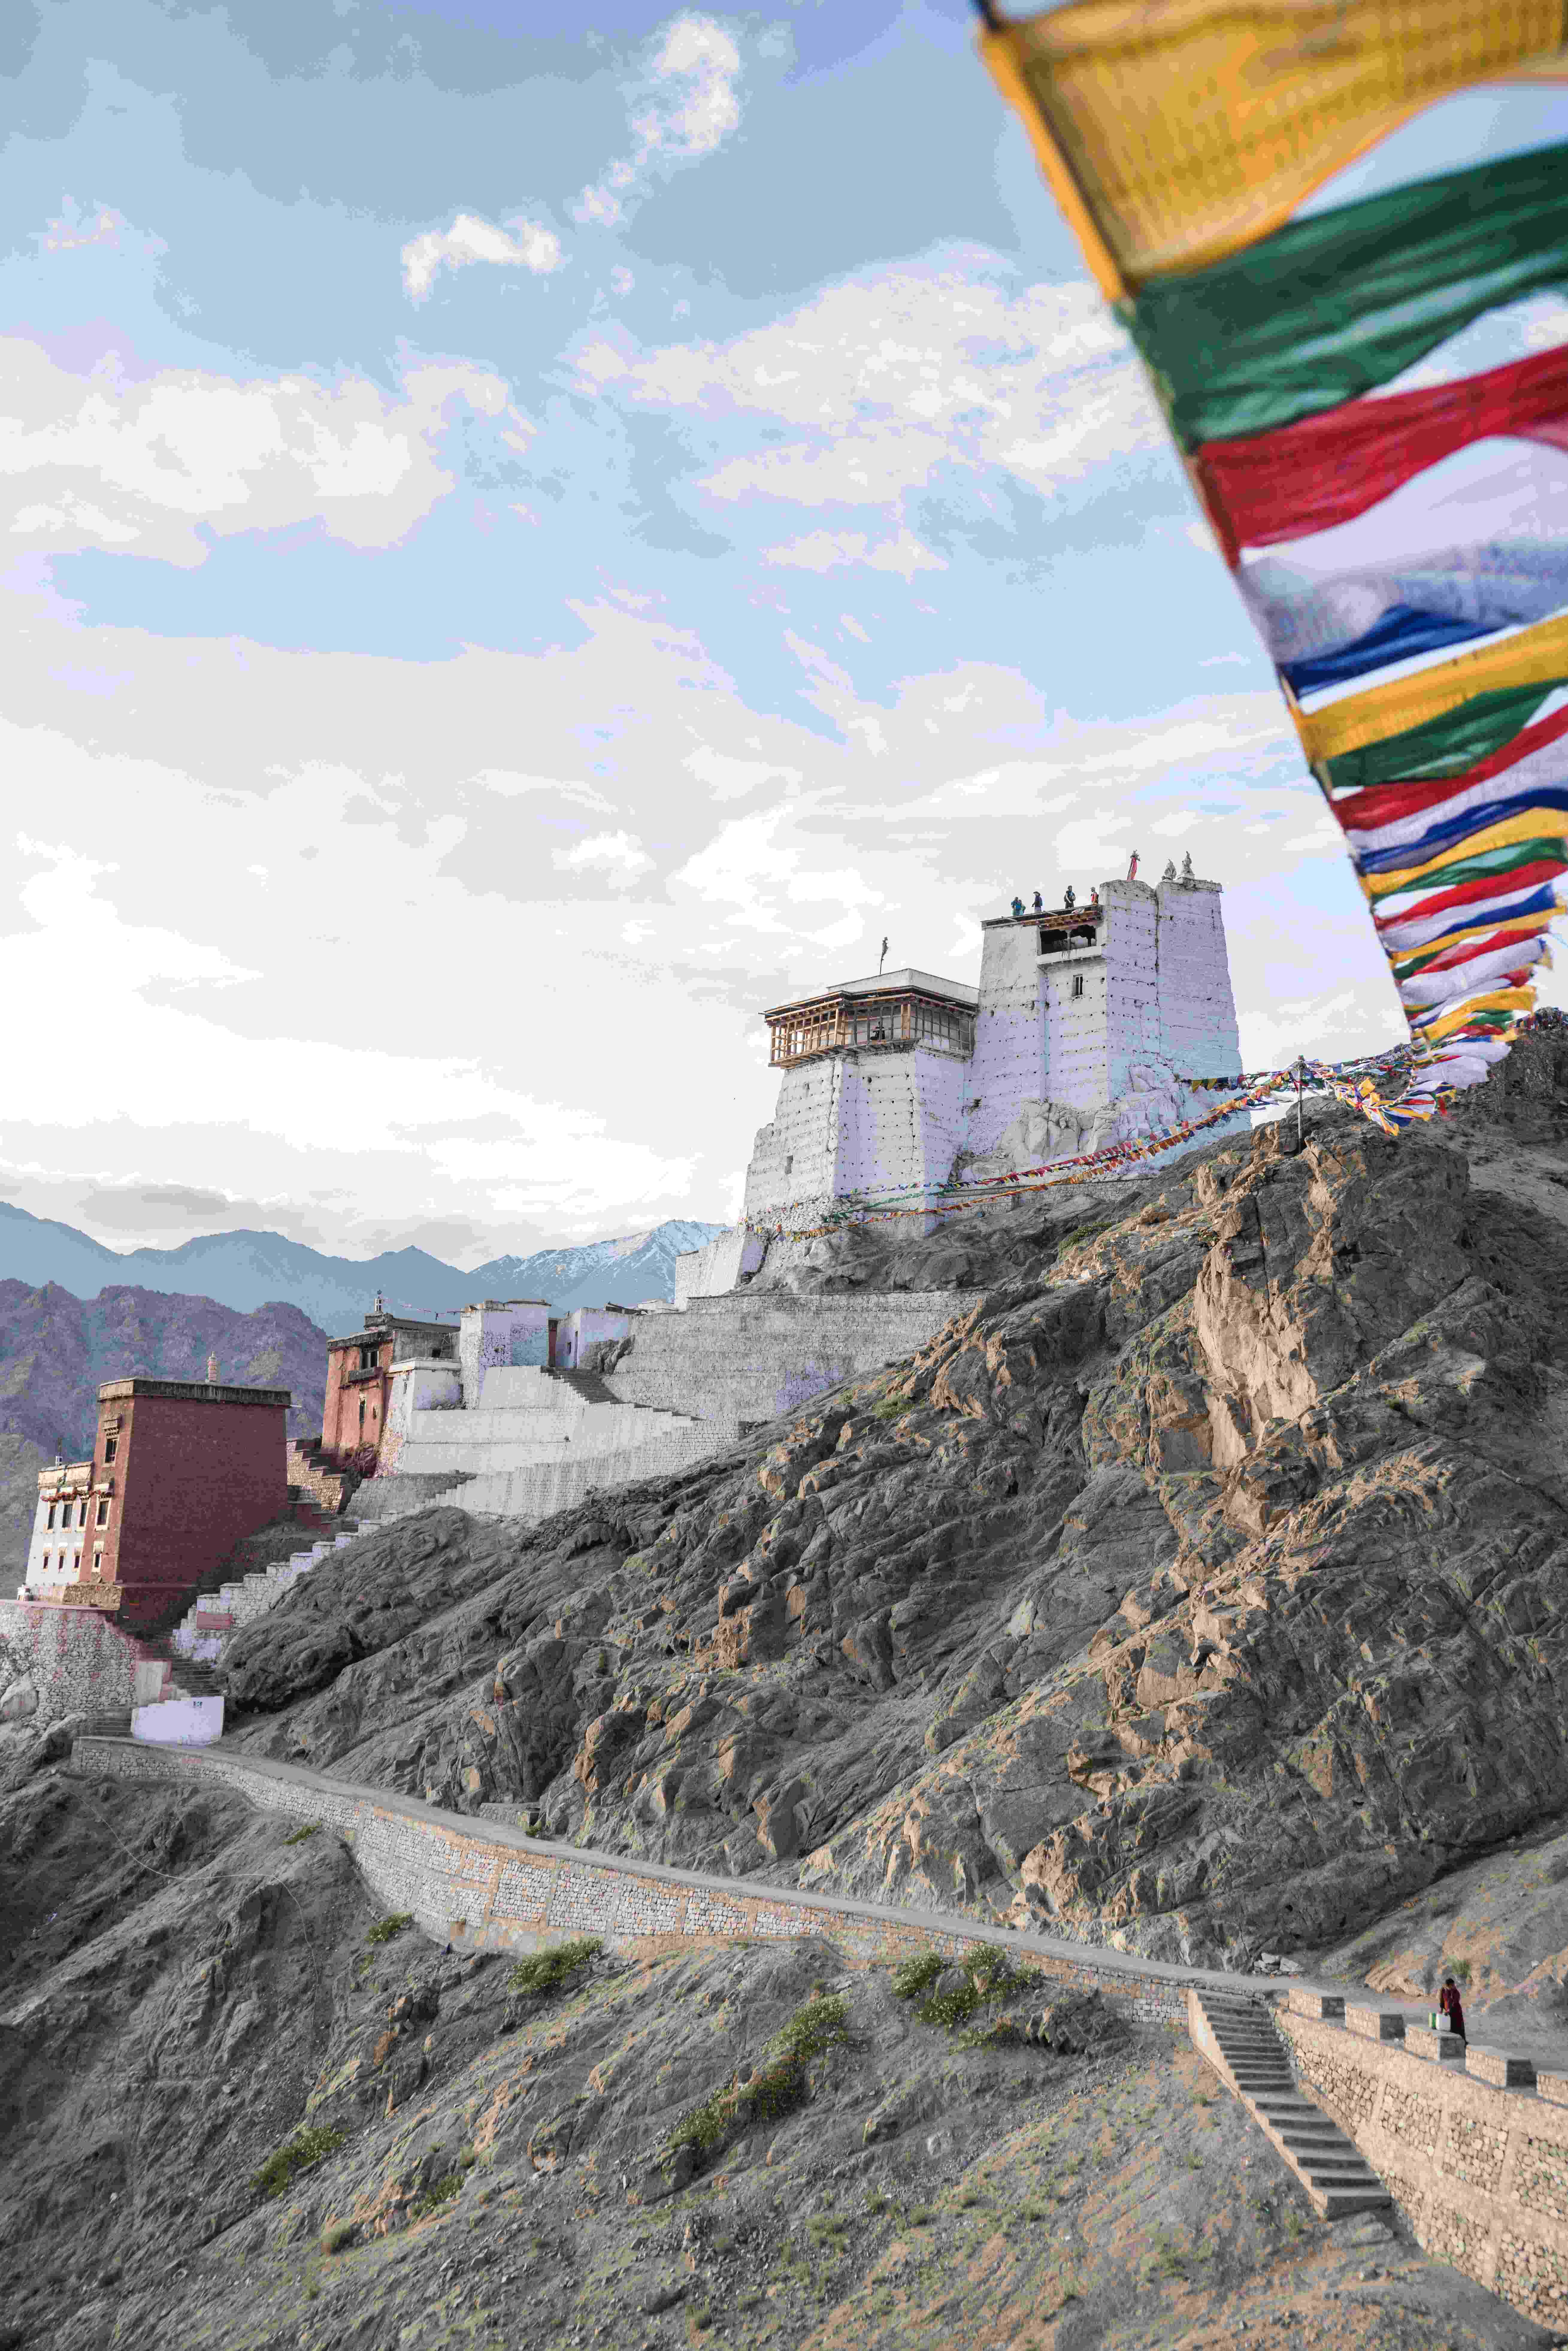 Exhilarating Leh Ladakh Tour from Manali: Explore the Land of High Passes with an Epic Journey